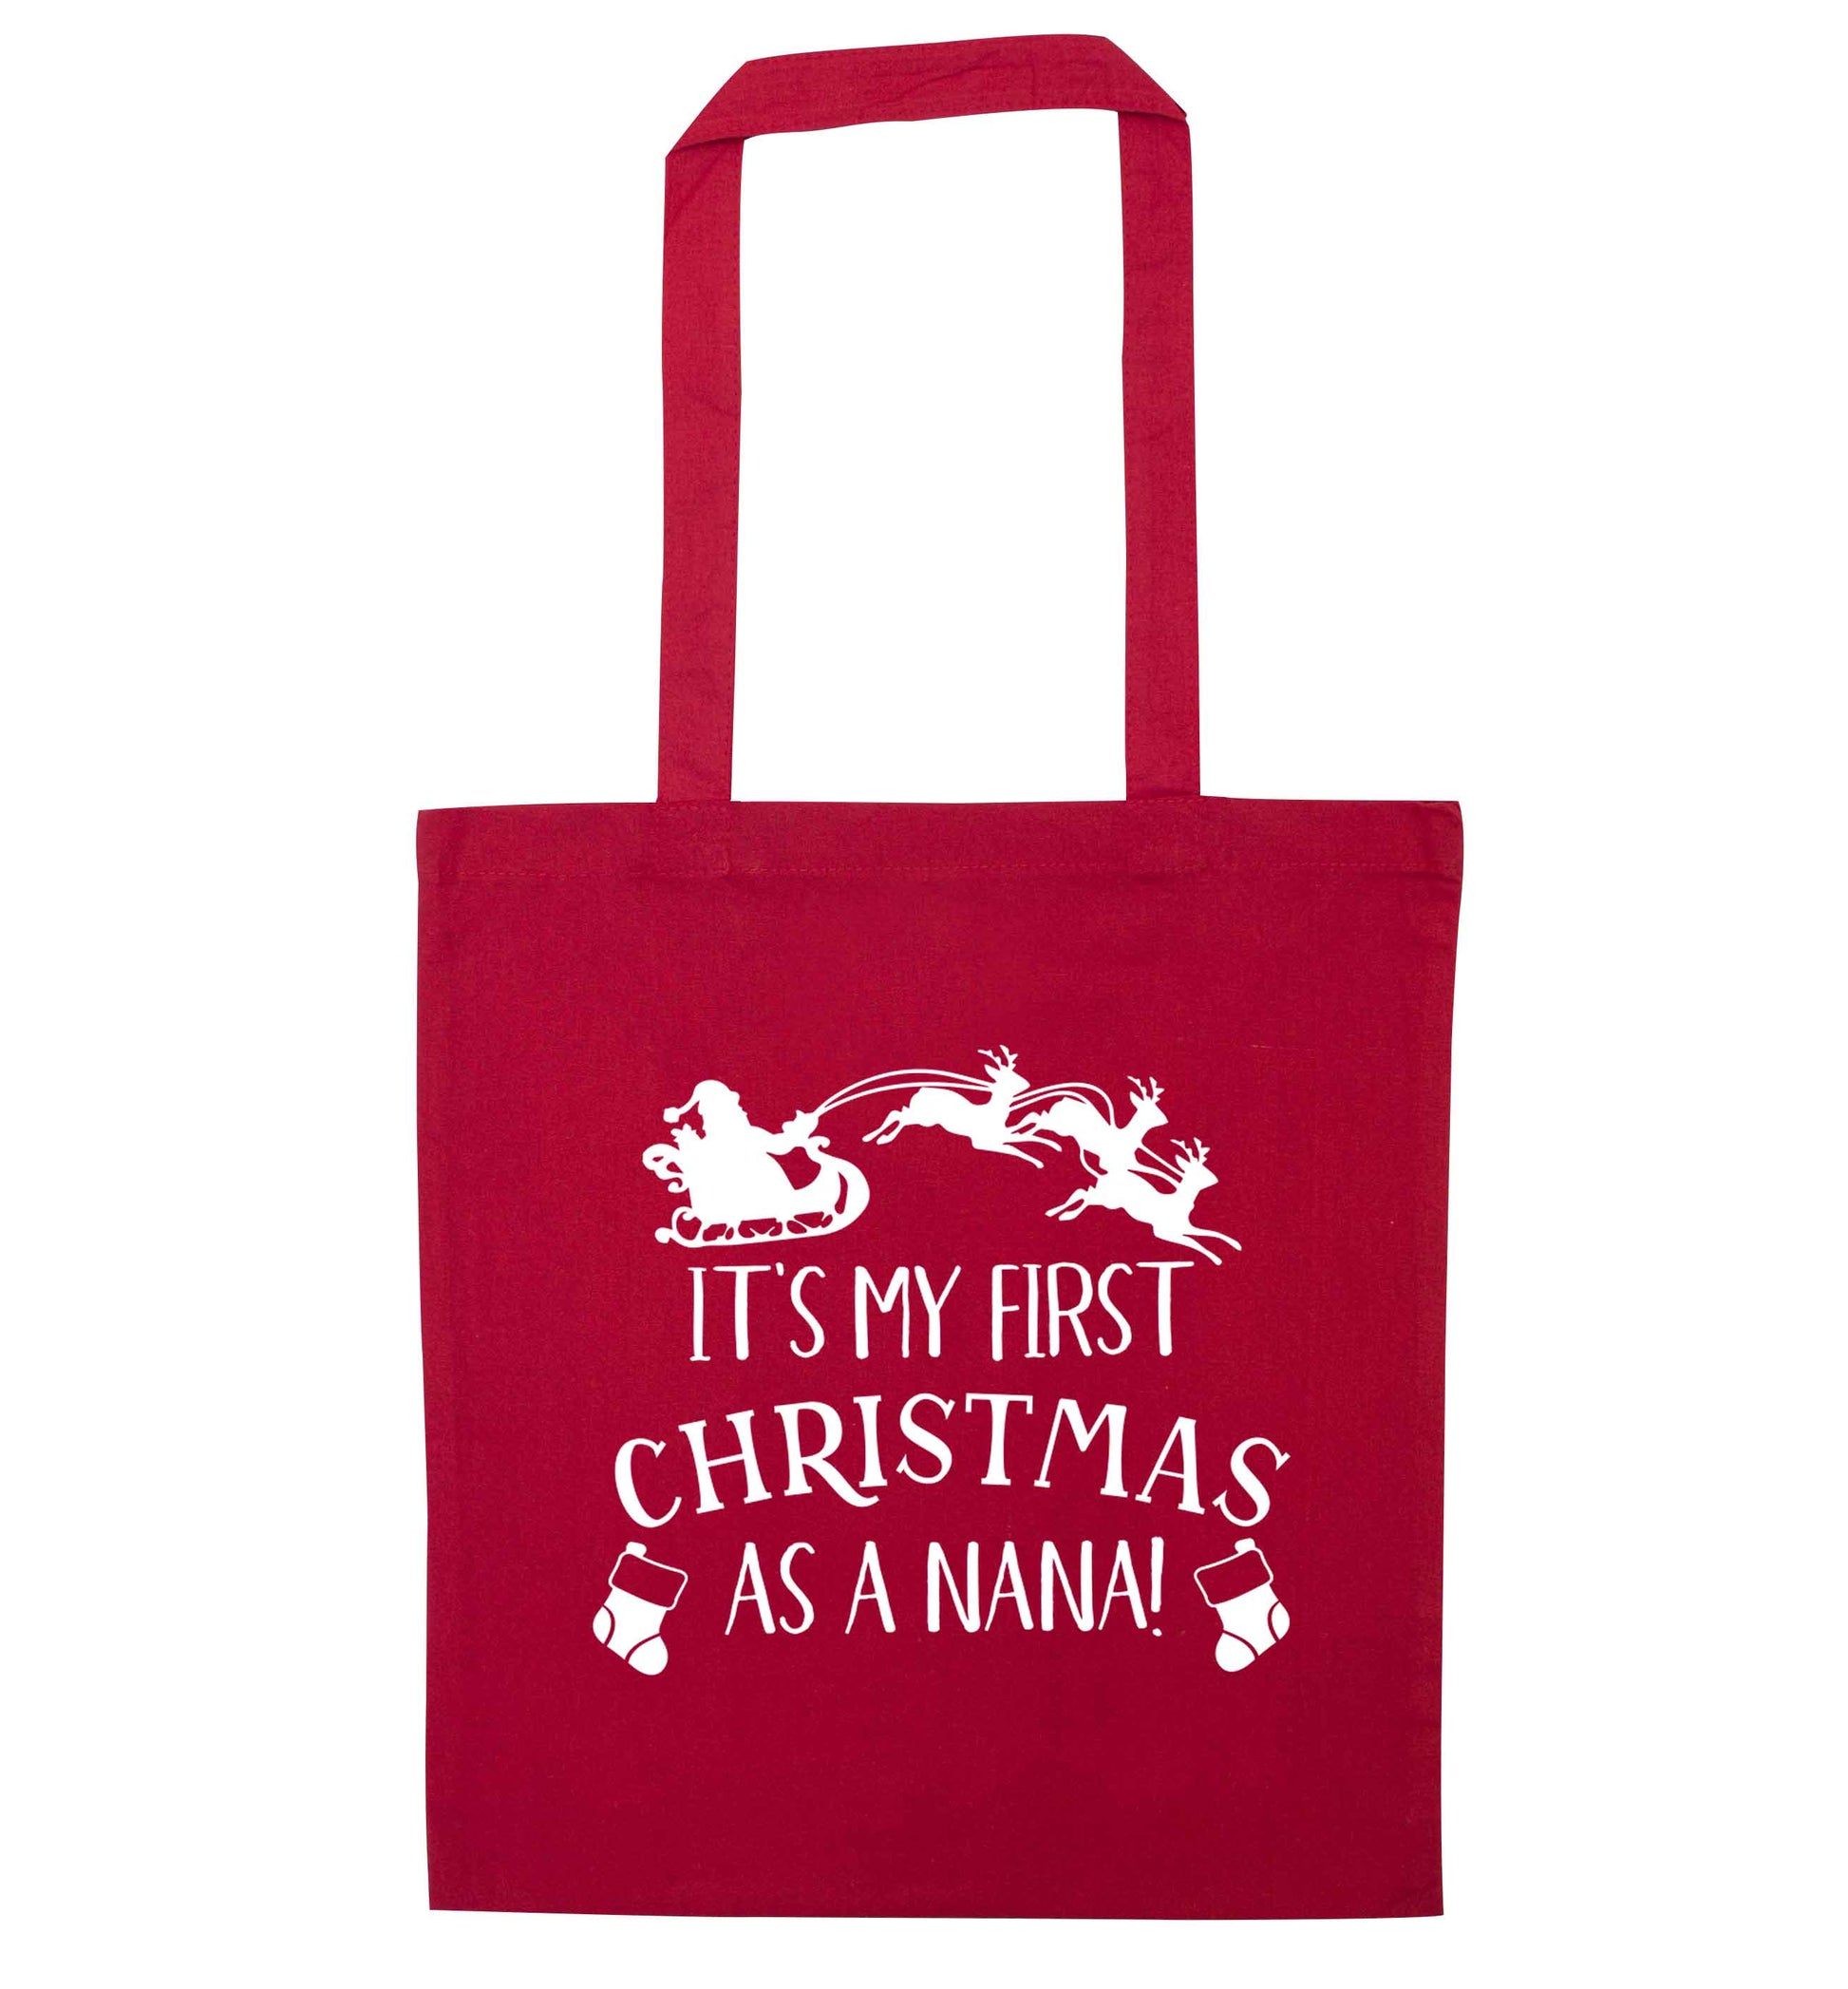 It's my first Christmas as a nana red tote bag